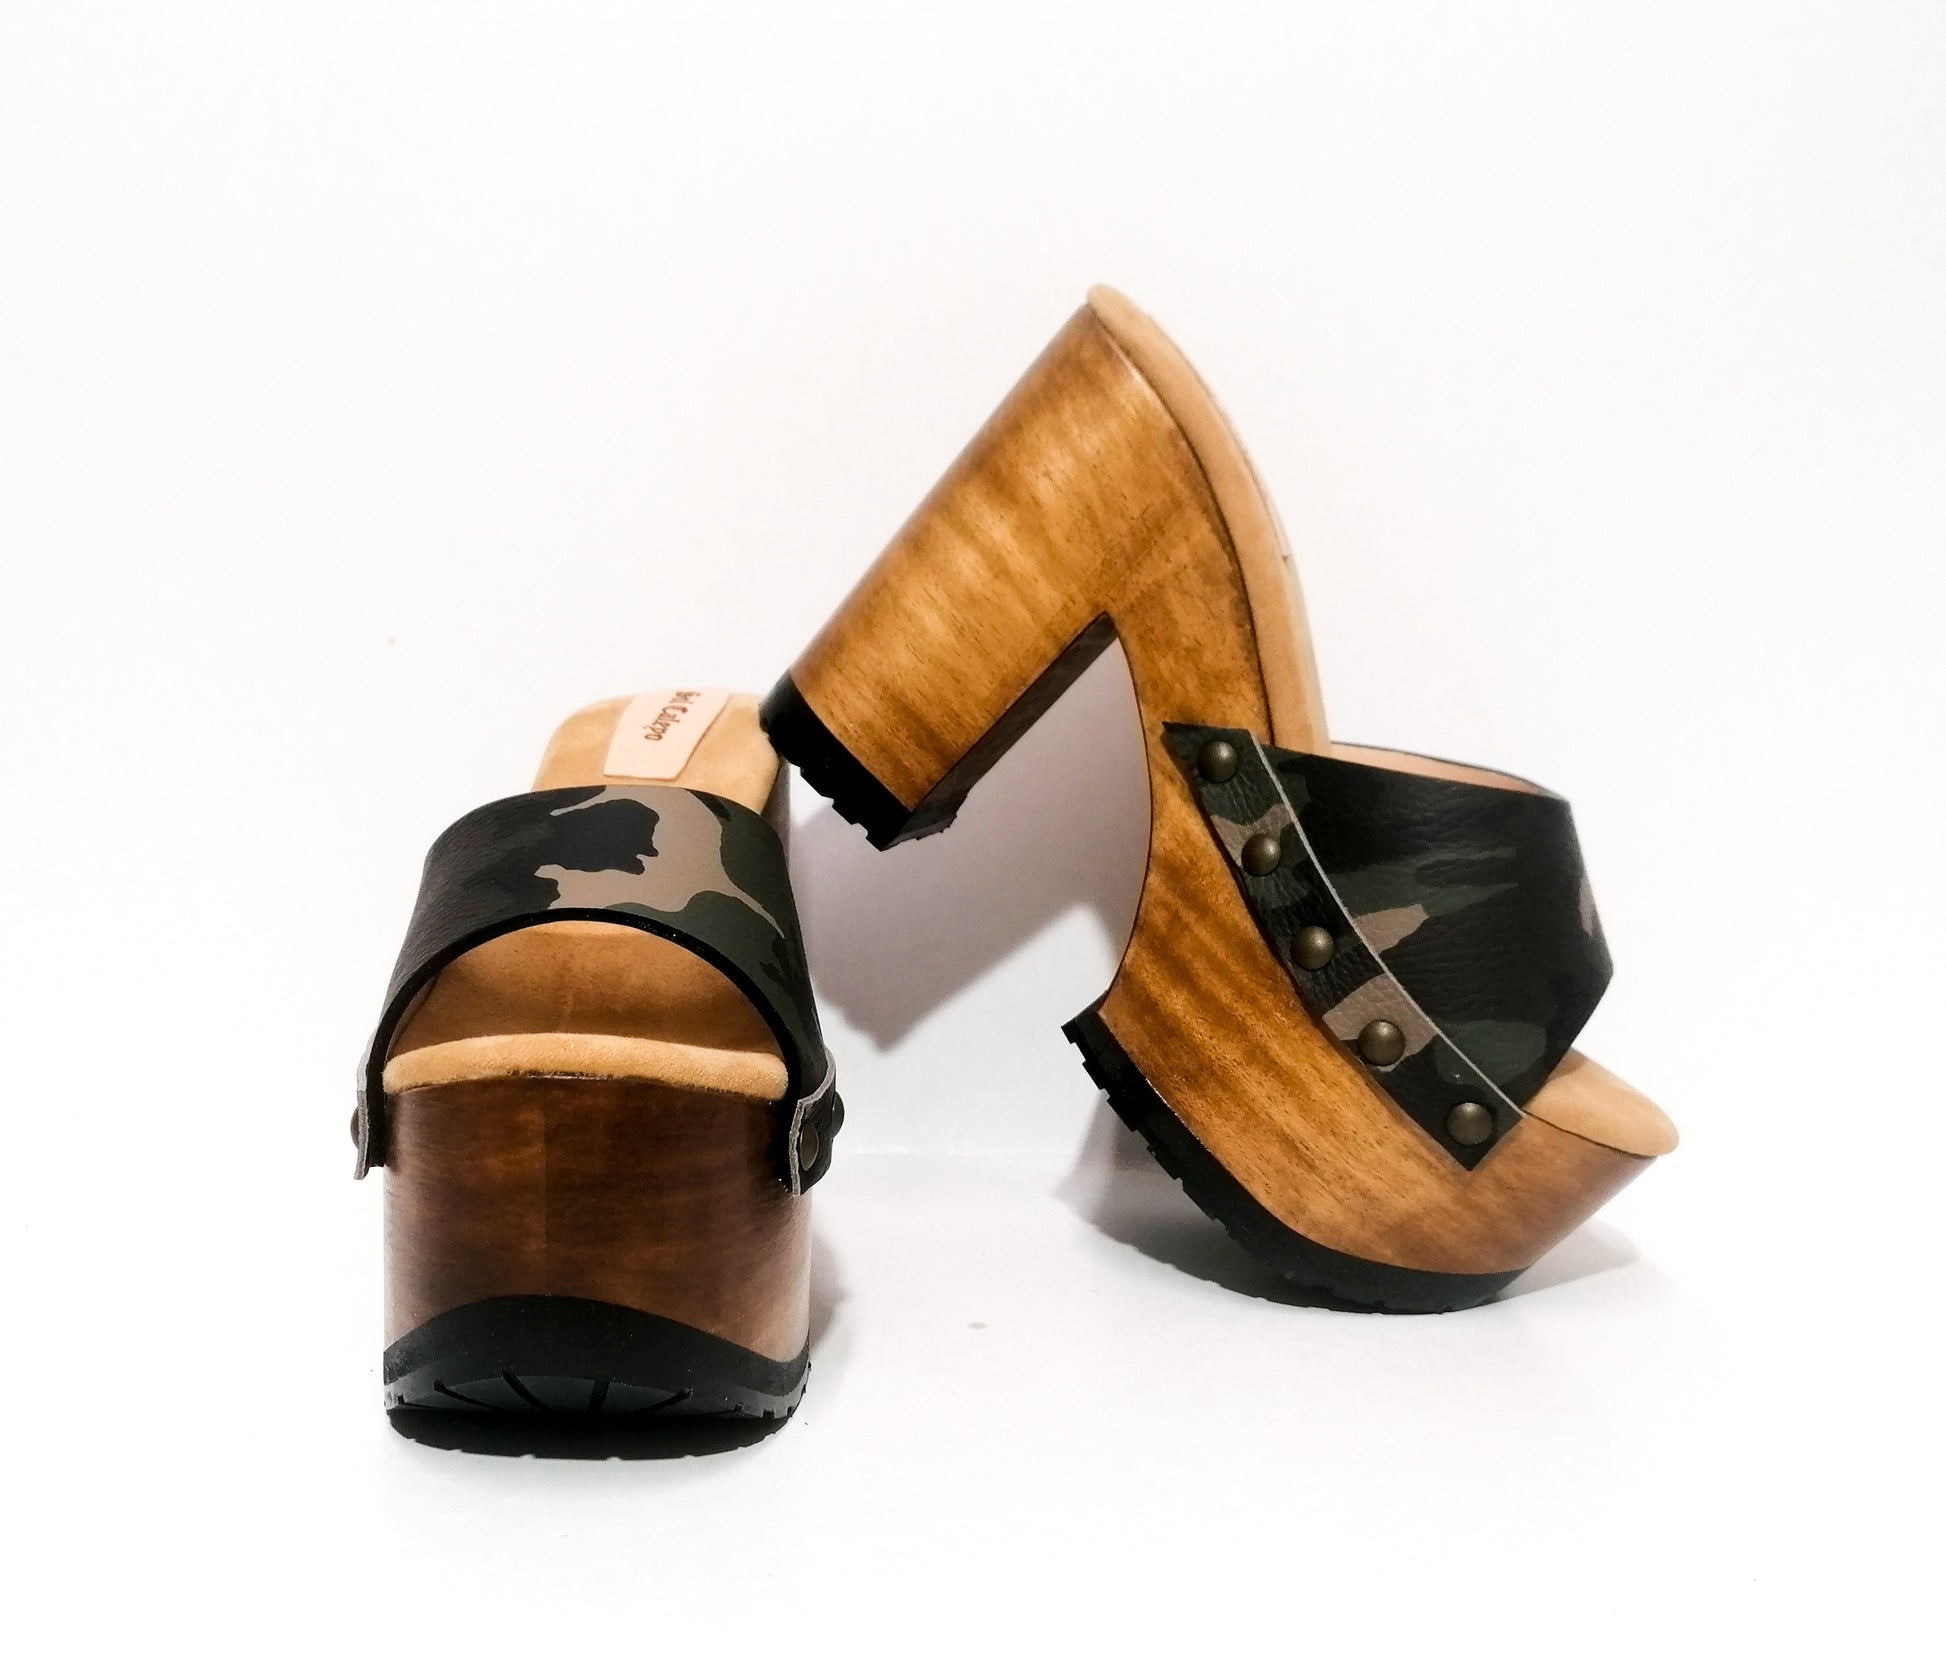 Military leather sandal peep toe style. Platform sandal with super high wooden heel. Clog sandal 70's style. Sizes 34 to 47. High quality handmade leather shoes by sol Caleyo. Sustainable fashion.